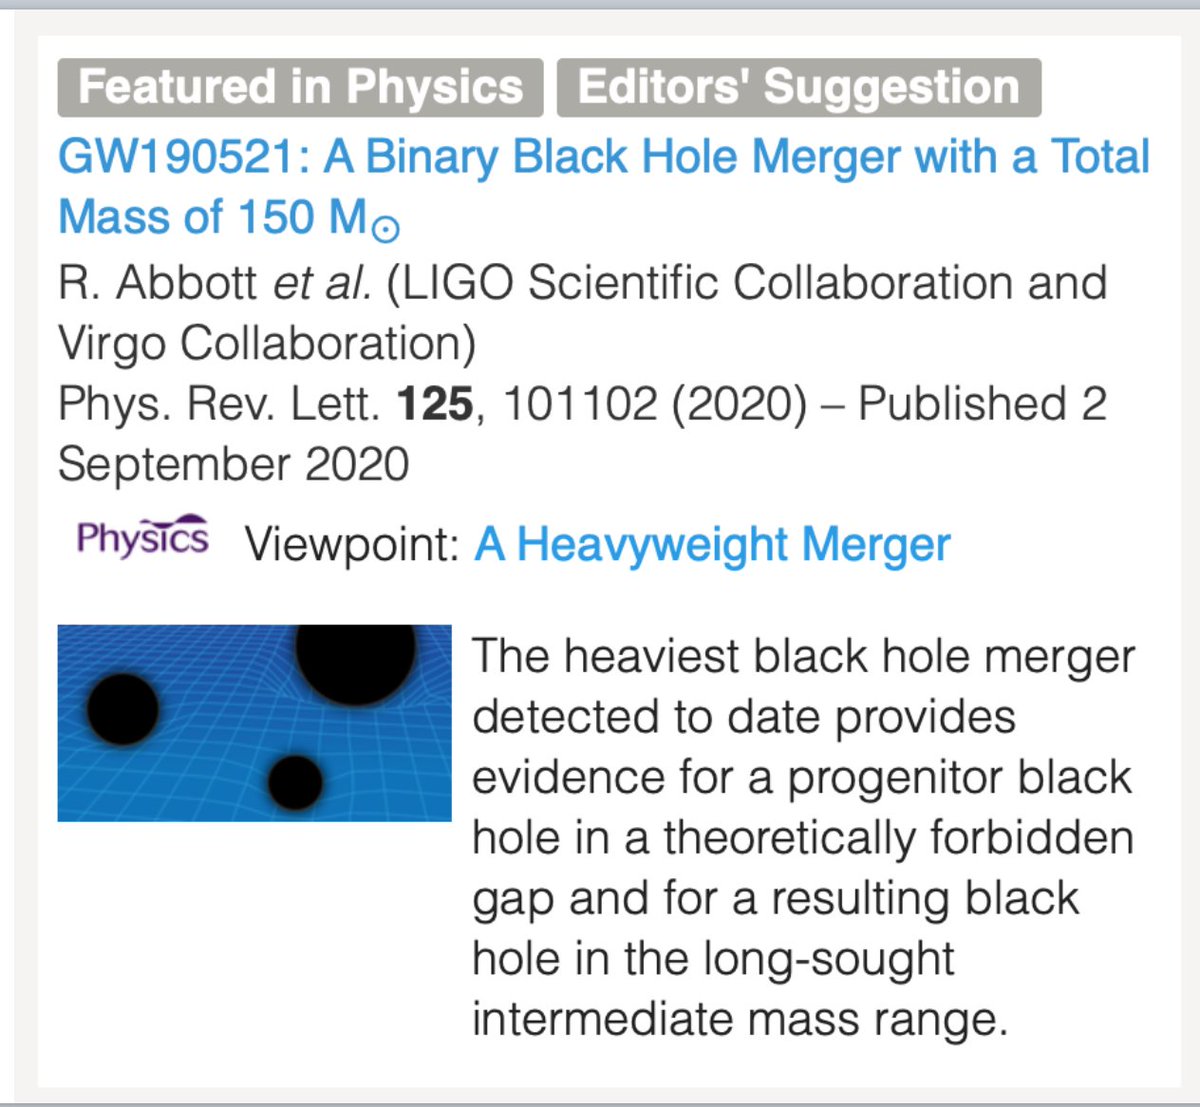 1/ I AM sTooOOoOkkeed about this latest LIGO result!Today’s  #PhysicsFriday , I am going to talk about the result, how it connects with detectors and some rad accounts to follow & learn more about this awesome science.Strap in! We are gonna talk about GIANT black holesss